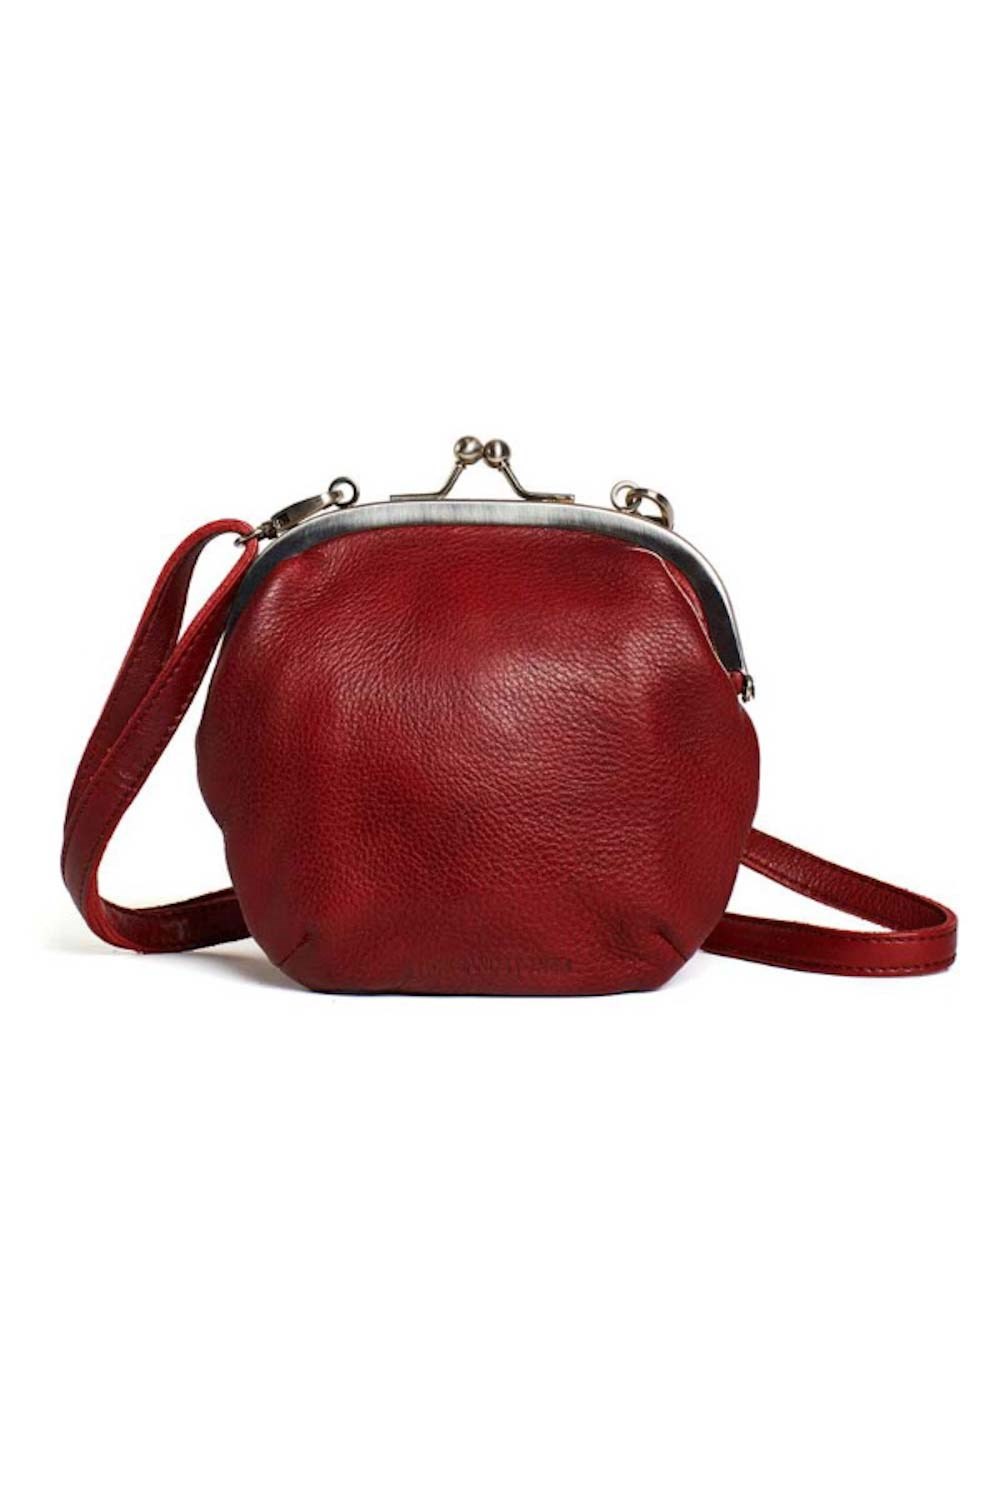 Monti Bag - Cow Vegetable Tan Bright Red